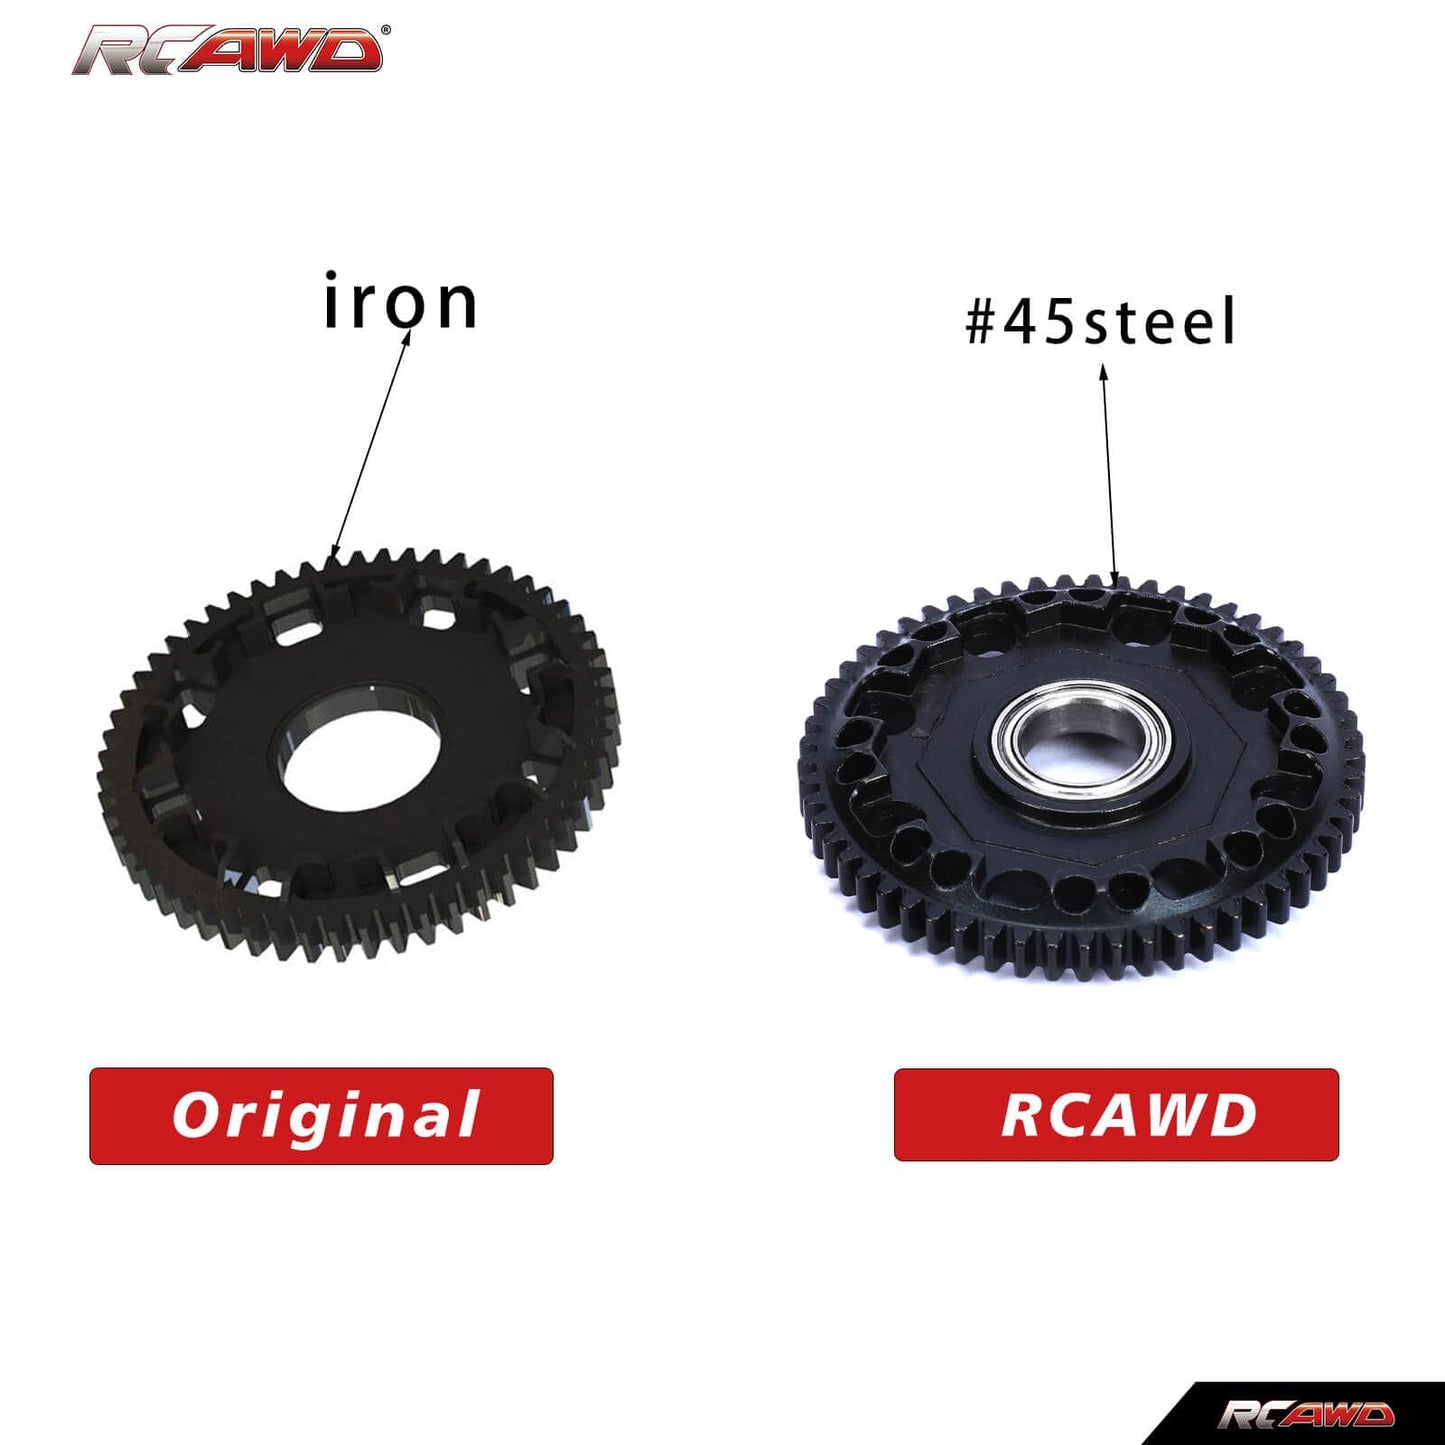 RCAWD ARRMA 3S RCAWD arrma 3s Upgrade Steel 57T 0.8Mod Spur Gear with Bearing